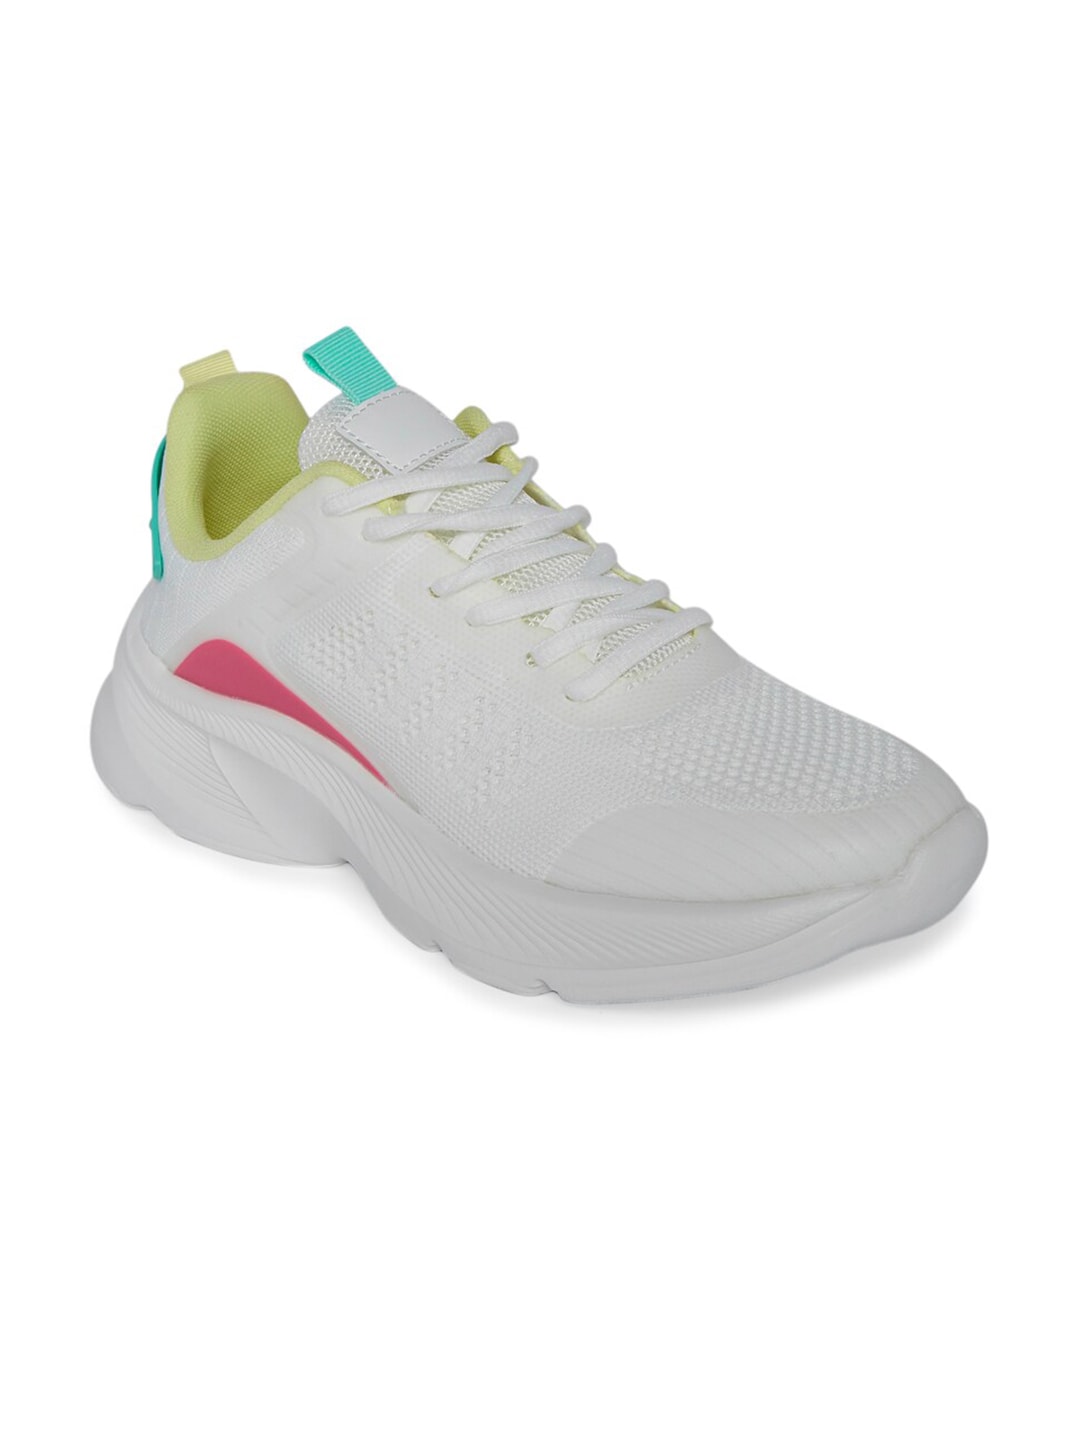 Forever Glam by Pantaloons Women White Running Non-Marking Shoes Price in India